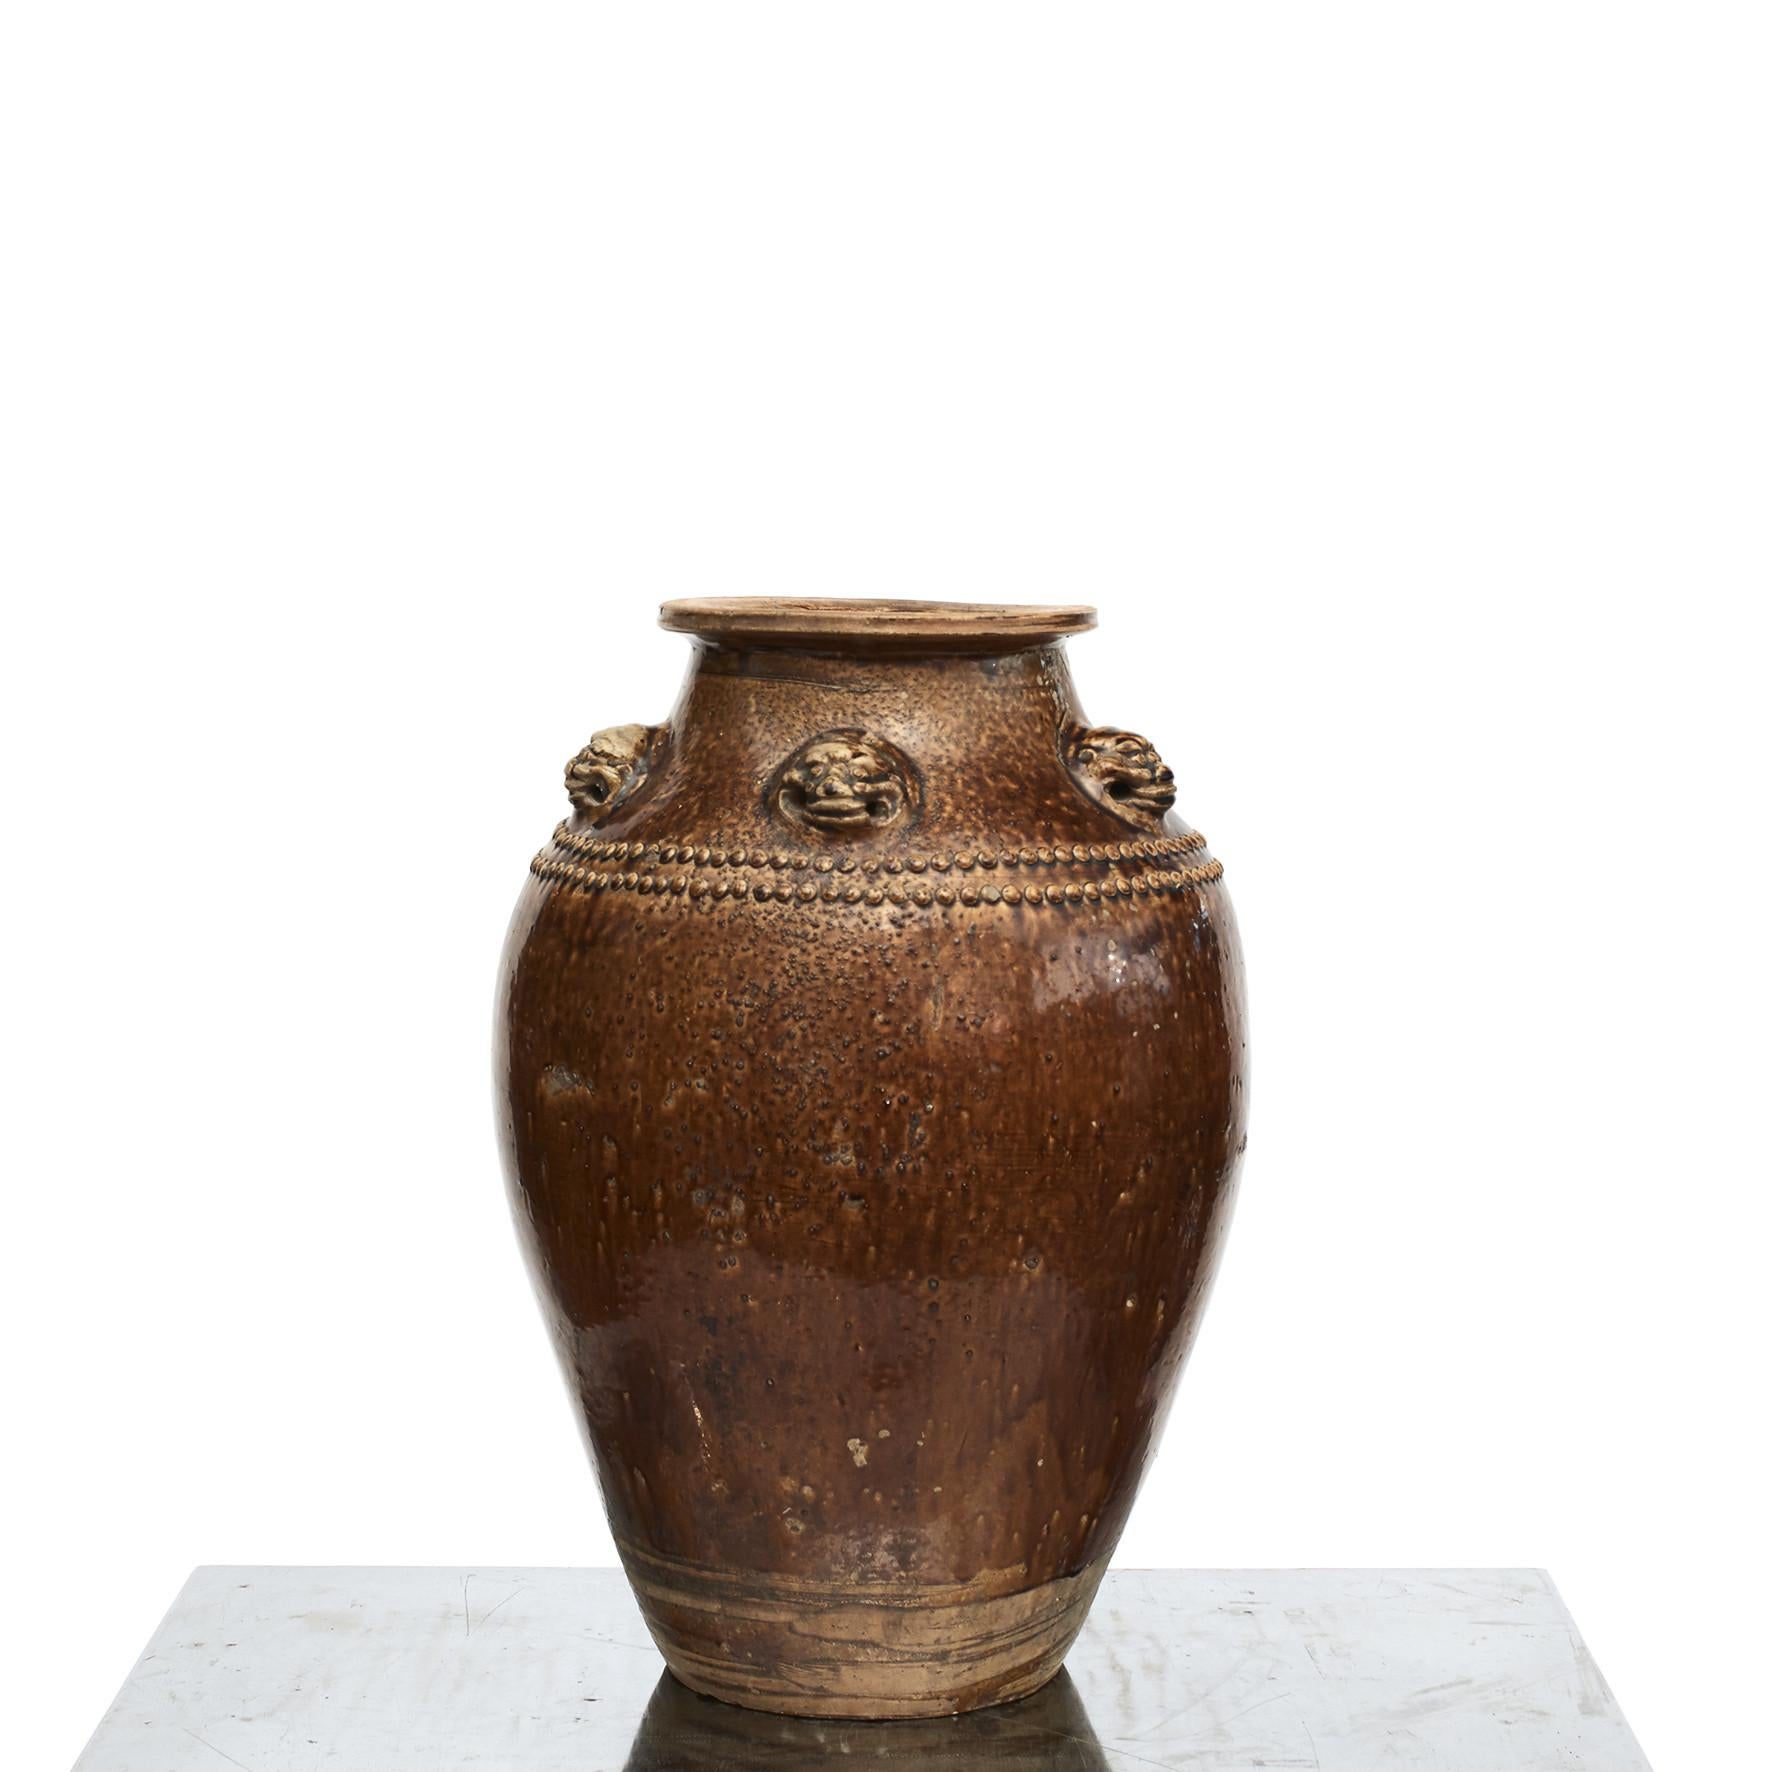 A fine and large Chinese brown ochre glazed stoneware storage jar, commonly known as a Martaban or Martavan jar.
Shoulders decorated with pearls and five lion heads molded in relief,
China, mid-19th century.
A beautiful and fascinating example of